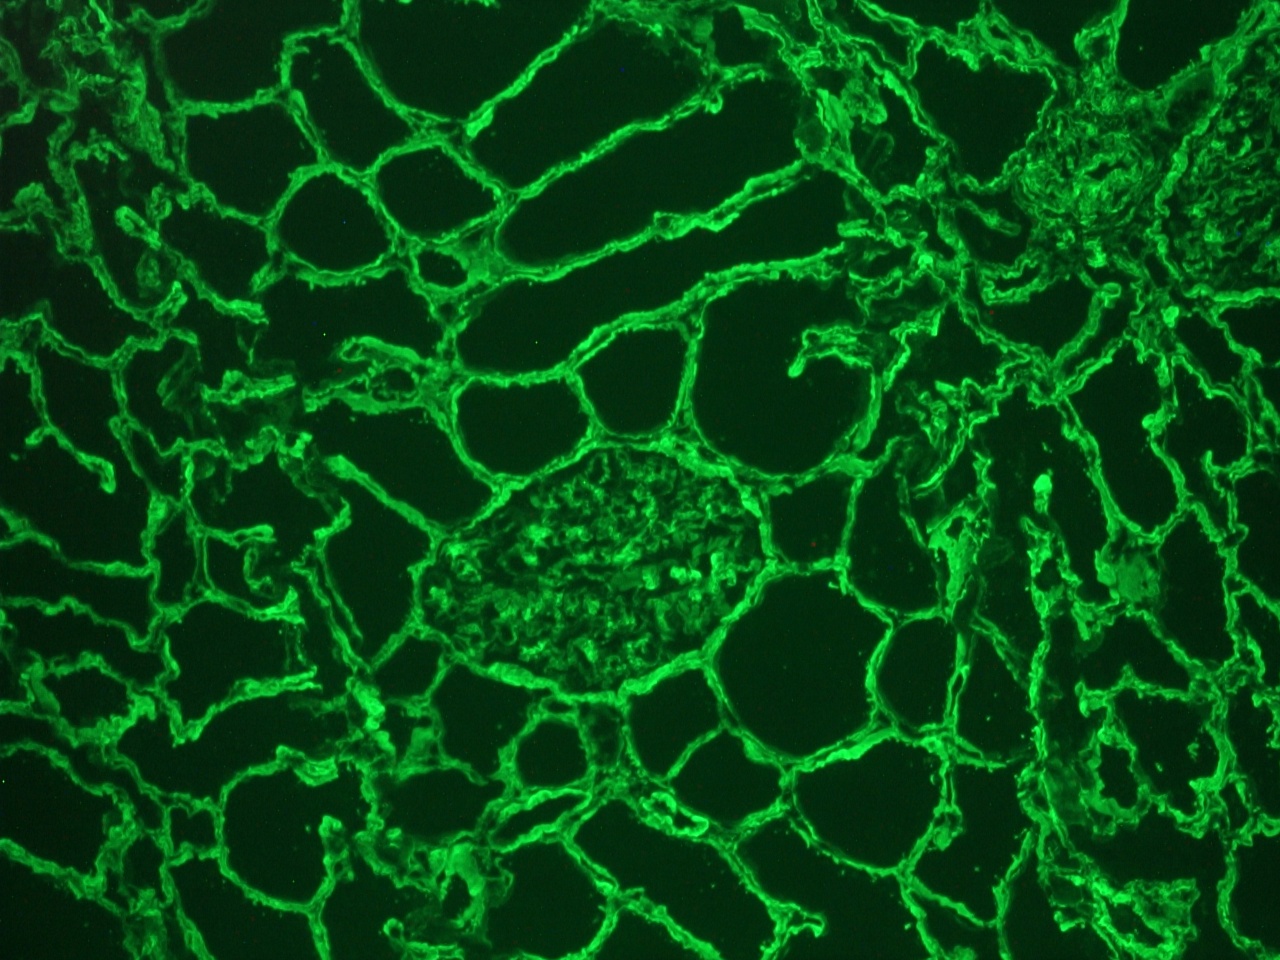 Figure 1: Collagen type IV staining of basement membranes and connective tissue in a frozen section of human kidney using MUB0338S.